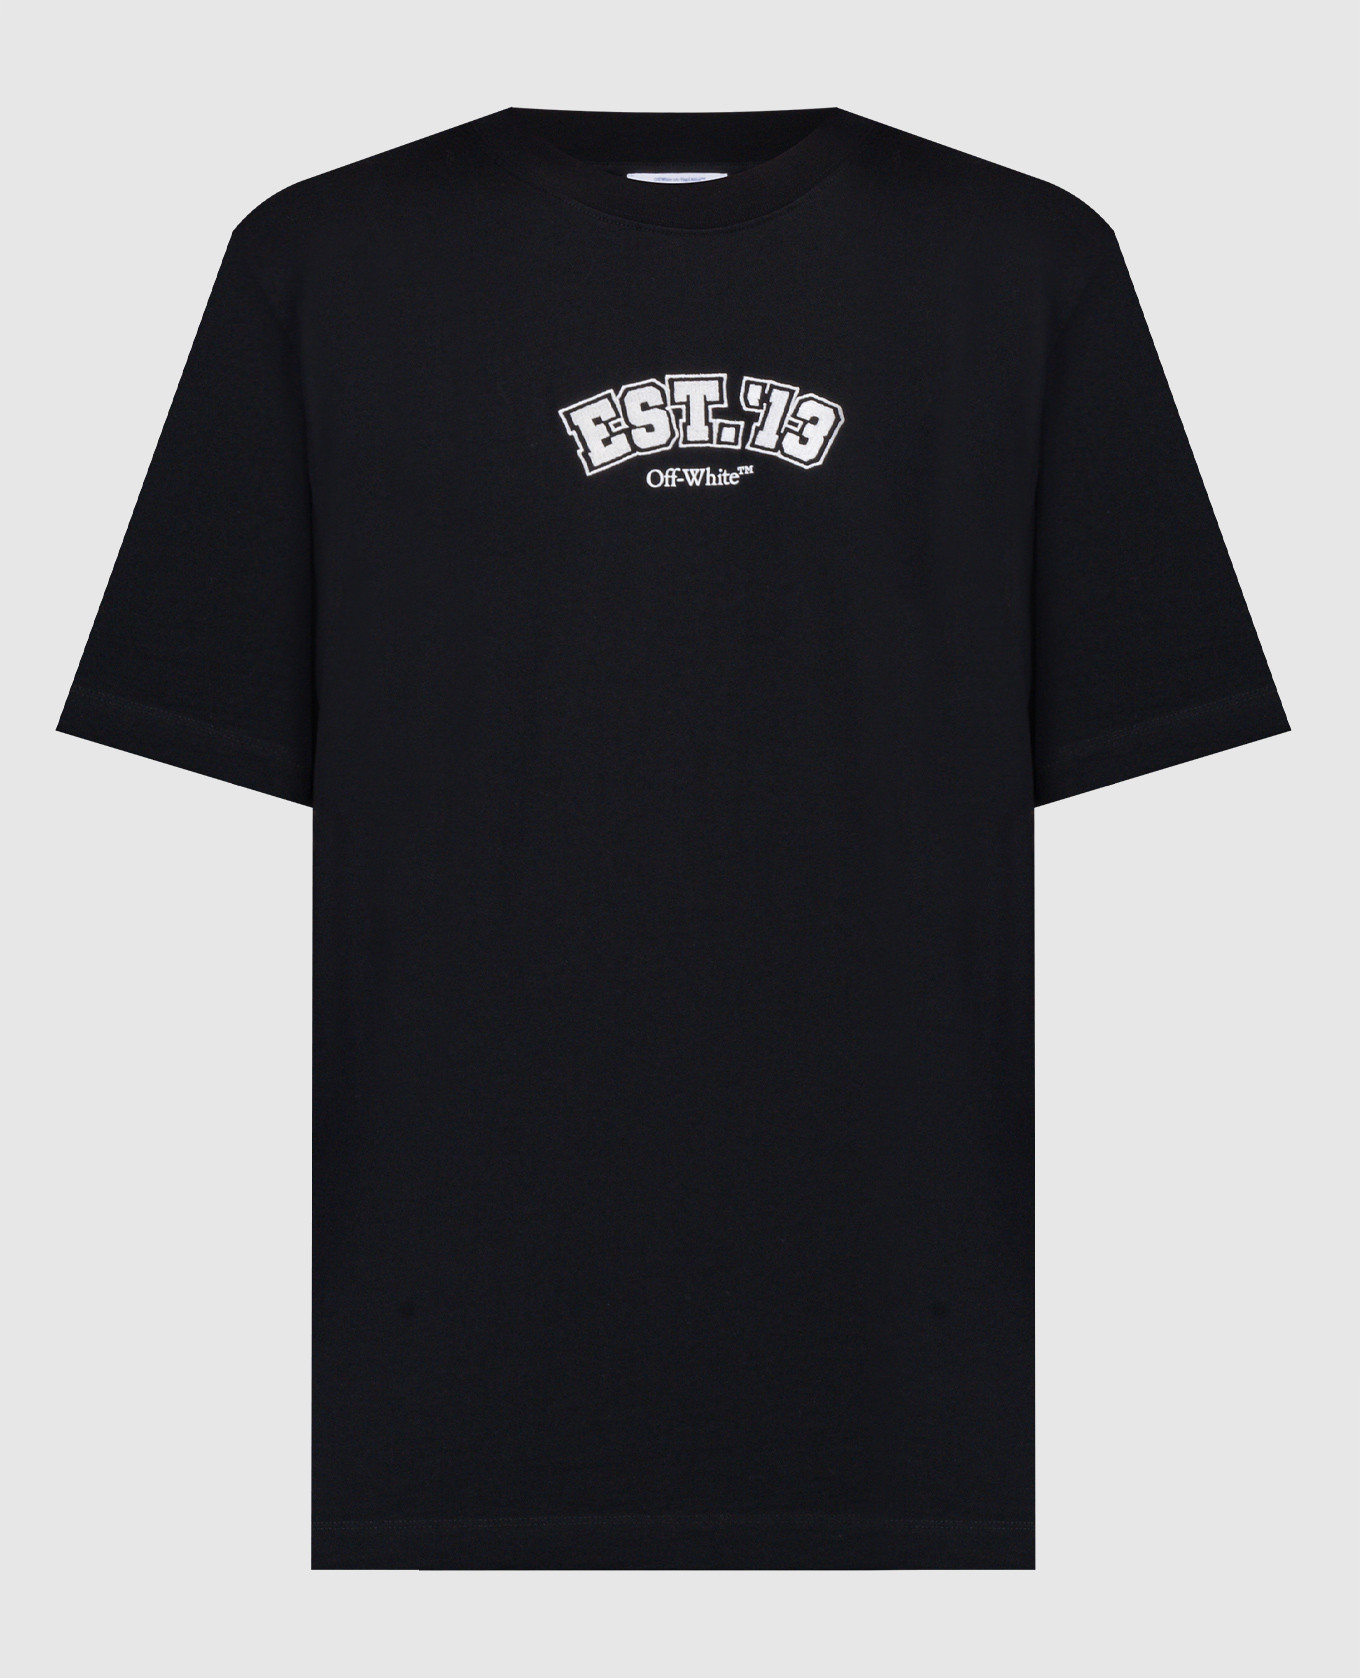 Black T-shirt by Logic with embroidery and logo print